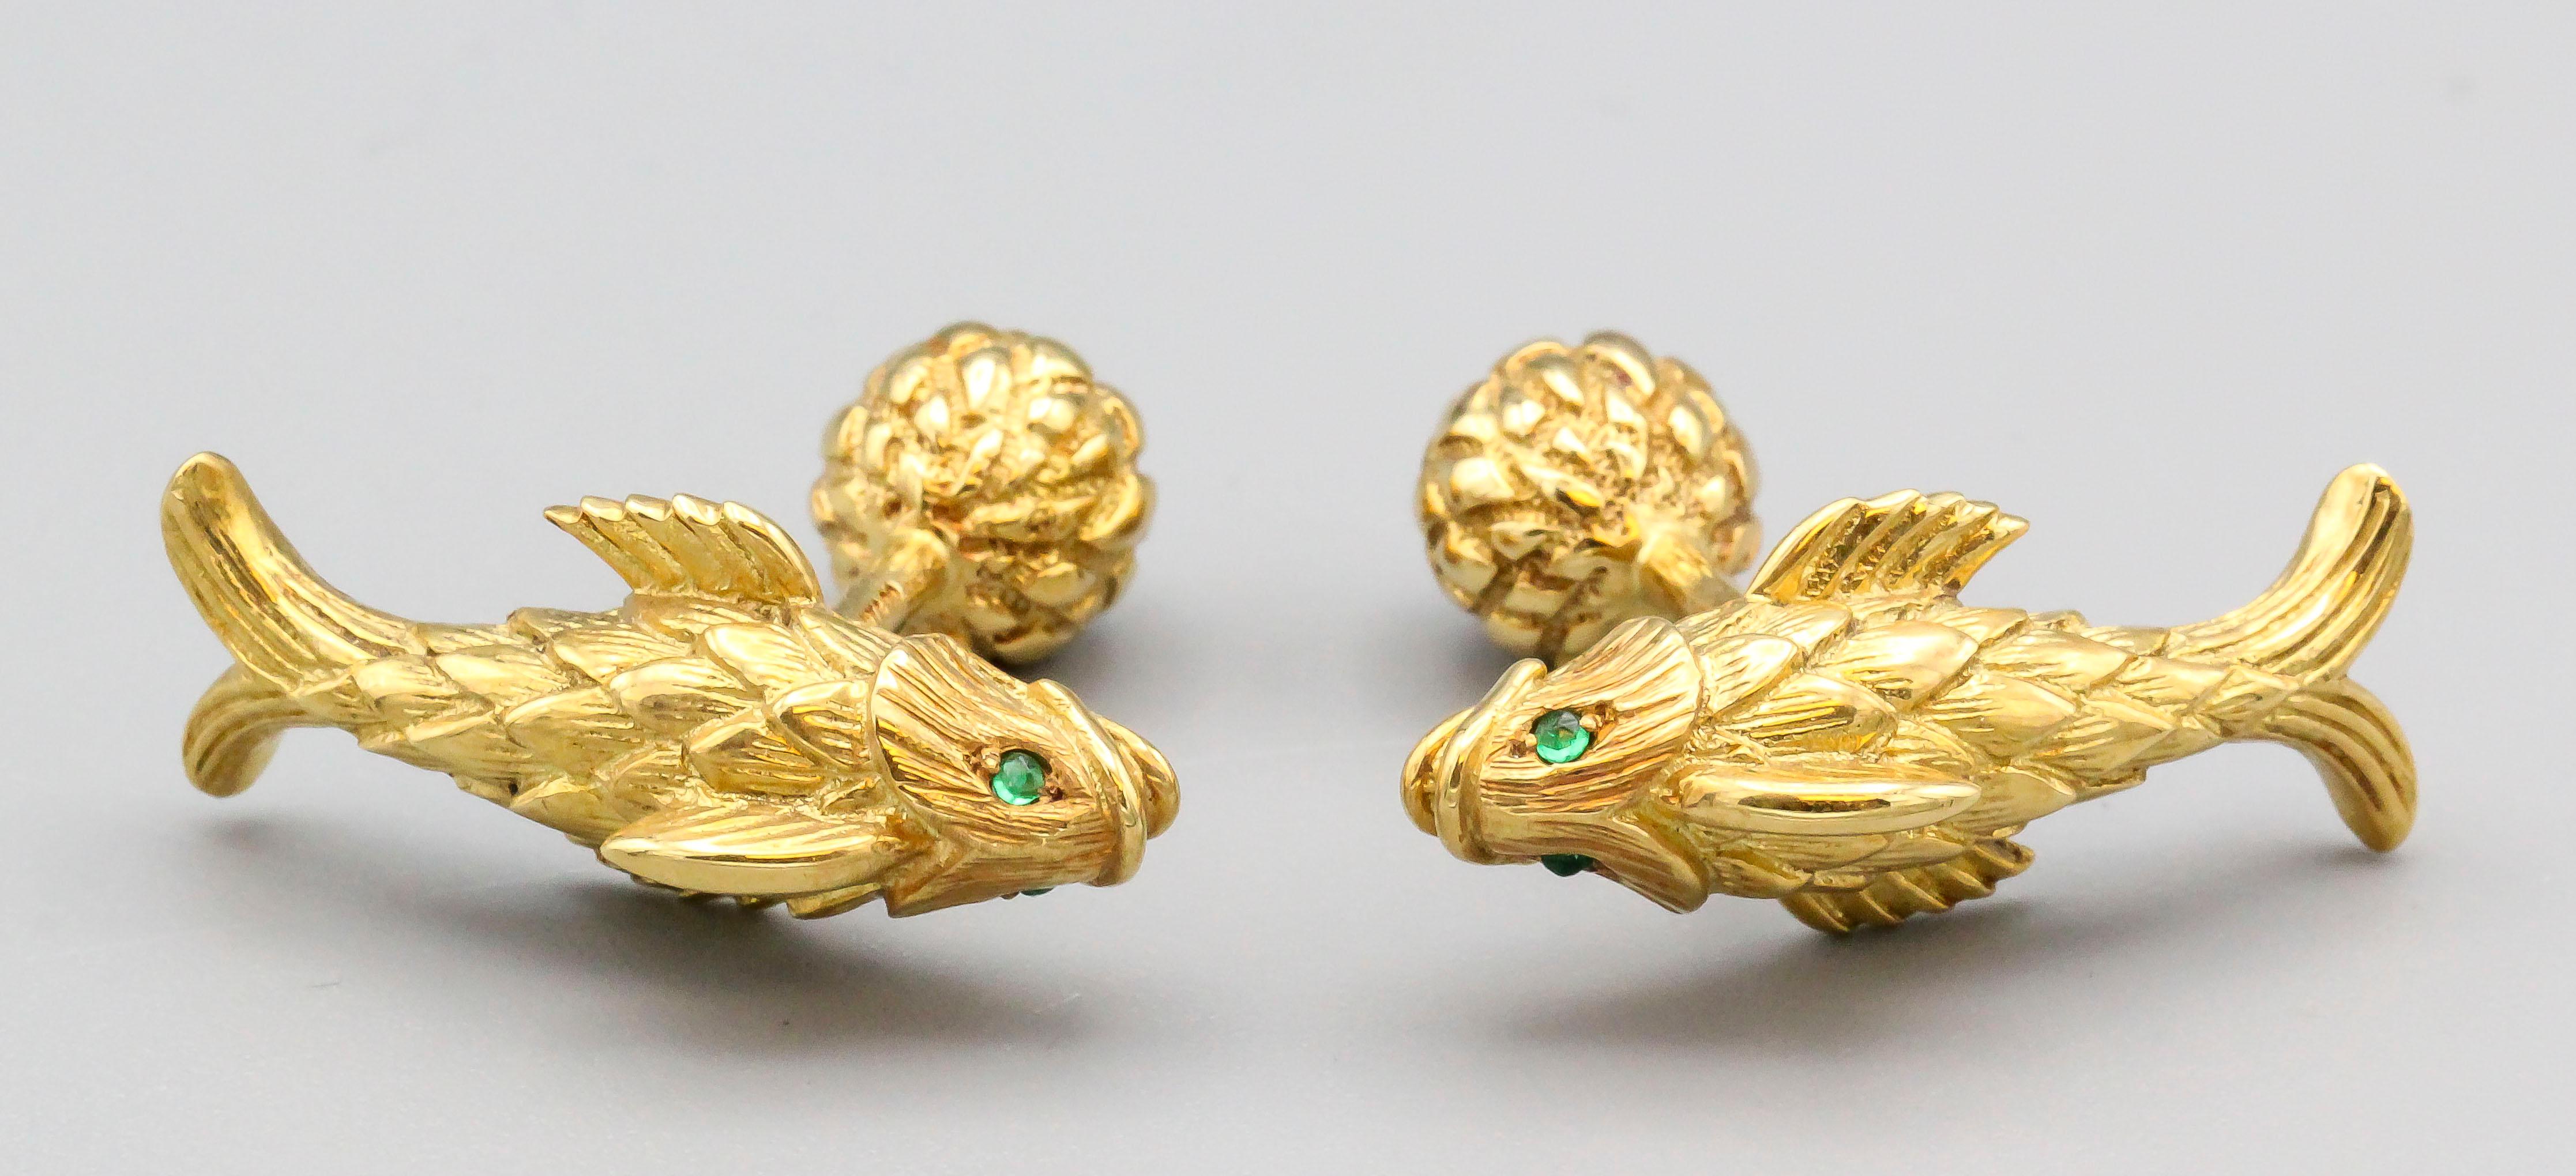 Fine pair of emerald and 18K yellow gold cufflinks by Tiffany & Co. Schlumberger. Designed as koi fish, they a further accented with emeralds as the eyes.

Hallmarks: Tiffany & Co. 18k, Schlumberger